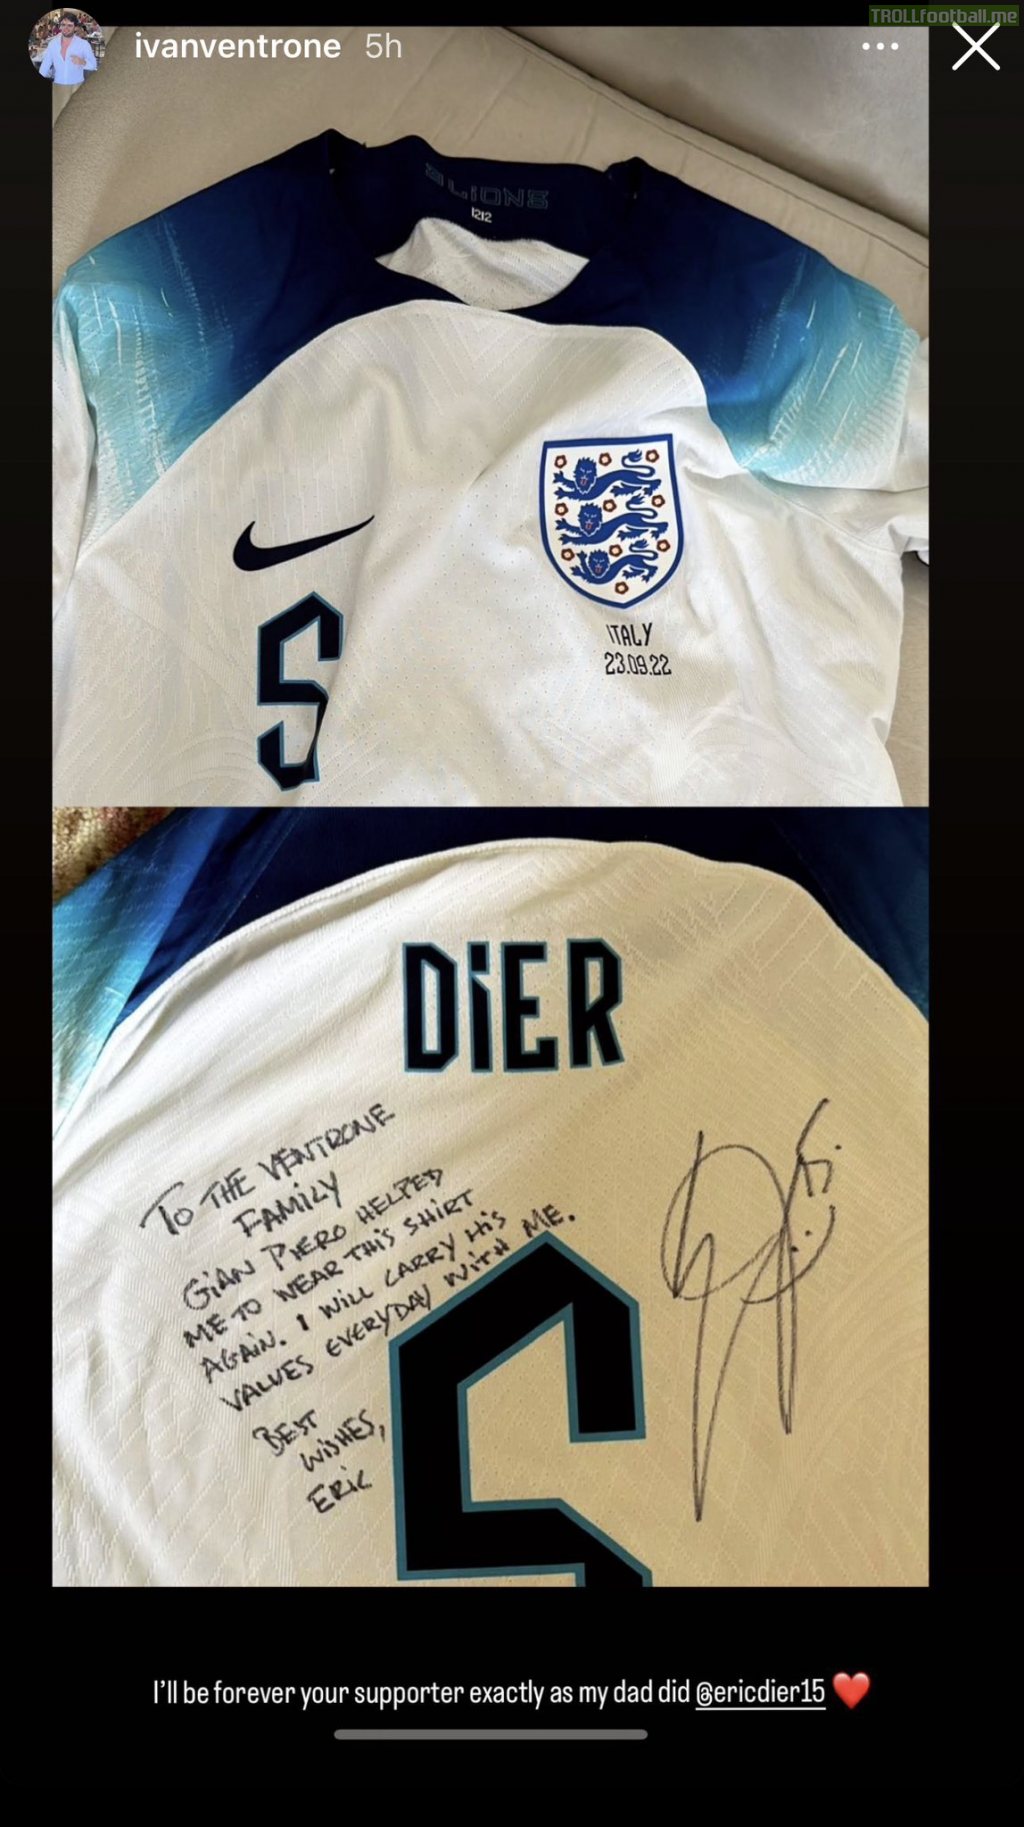 Eric Dier sent the family of Gian Piero Ventrone his England shirt from the last set of internationals. "To the Ventrone family, Gian Piero helped me to wear this shirt again. I will carry his values every day with me. Best wishes, Eric."